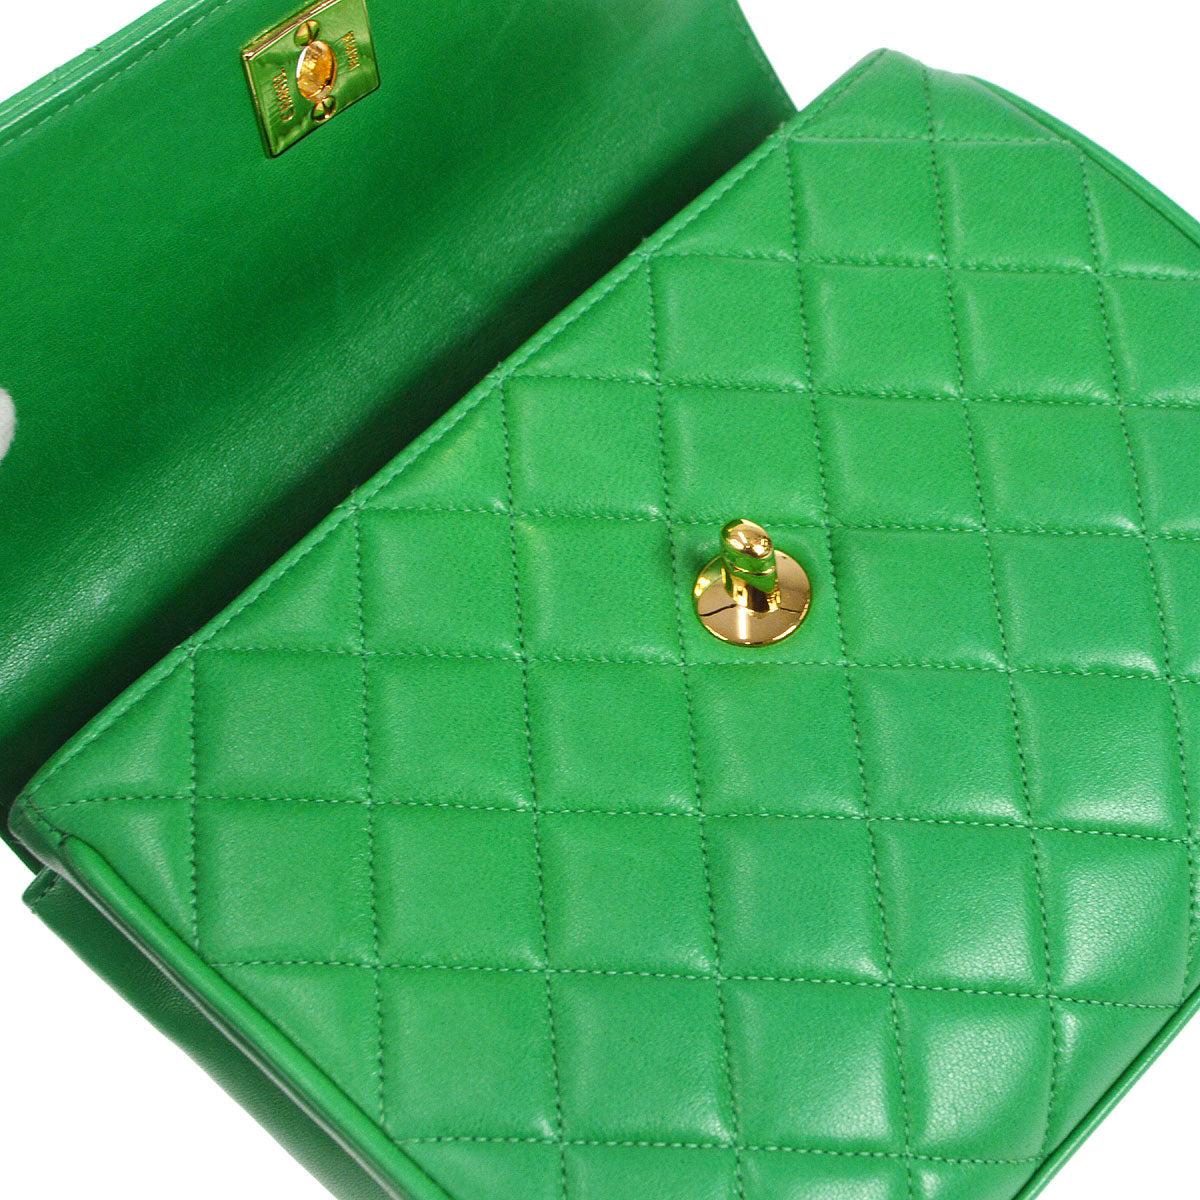 CHANEL Emerald Green Lambskin Leather Gold Small Top Handle Evening Flap Bag 1